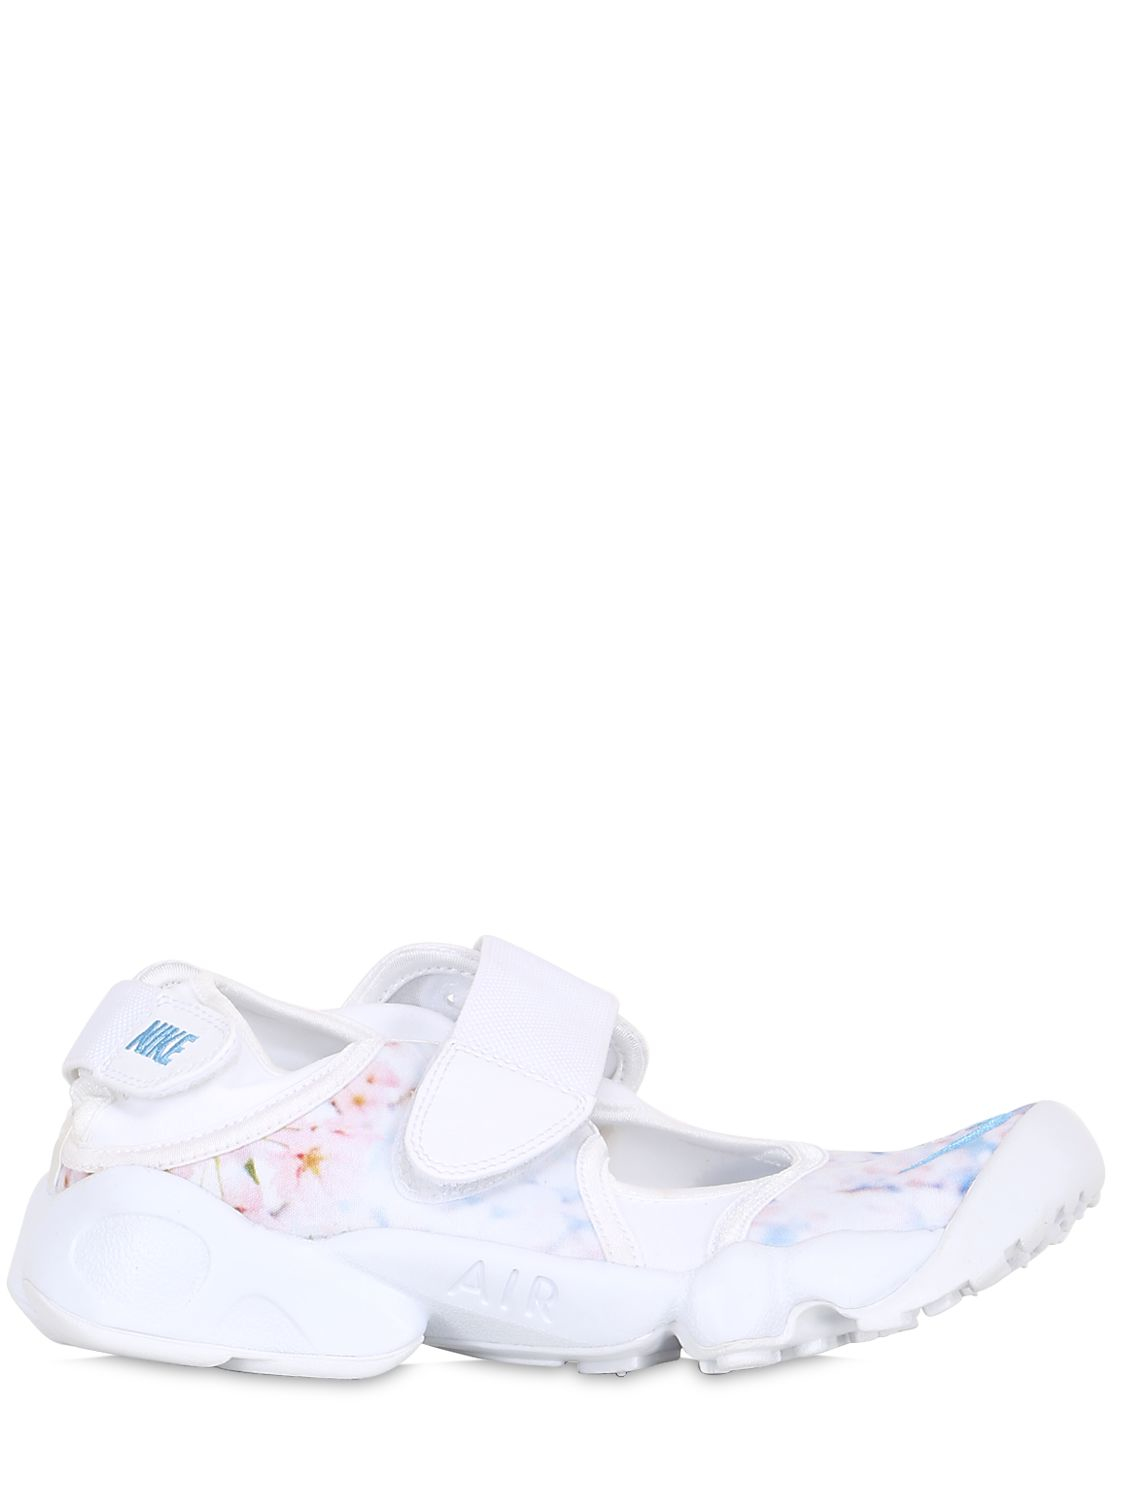 Nike Synthetic Air Rift Cherry Blossom Nylon Sneakers in White | Lyst